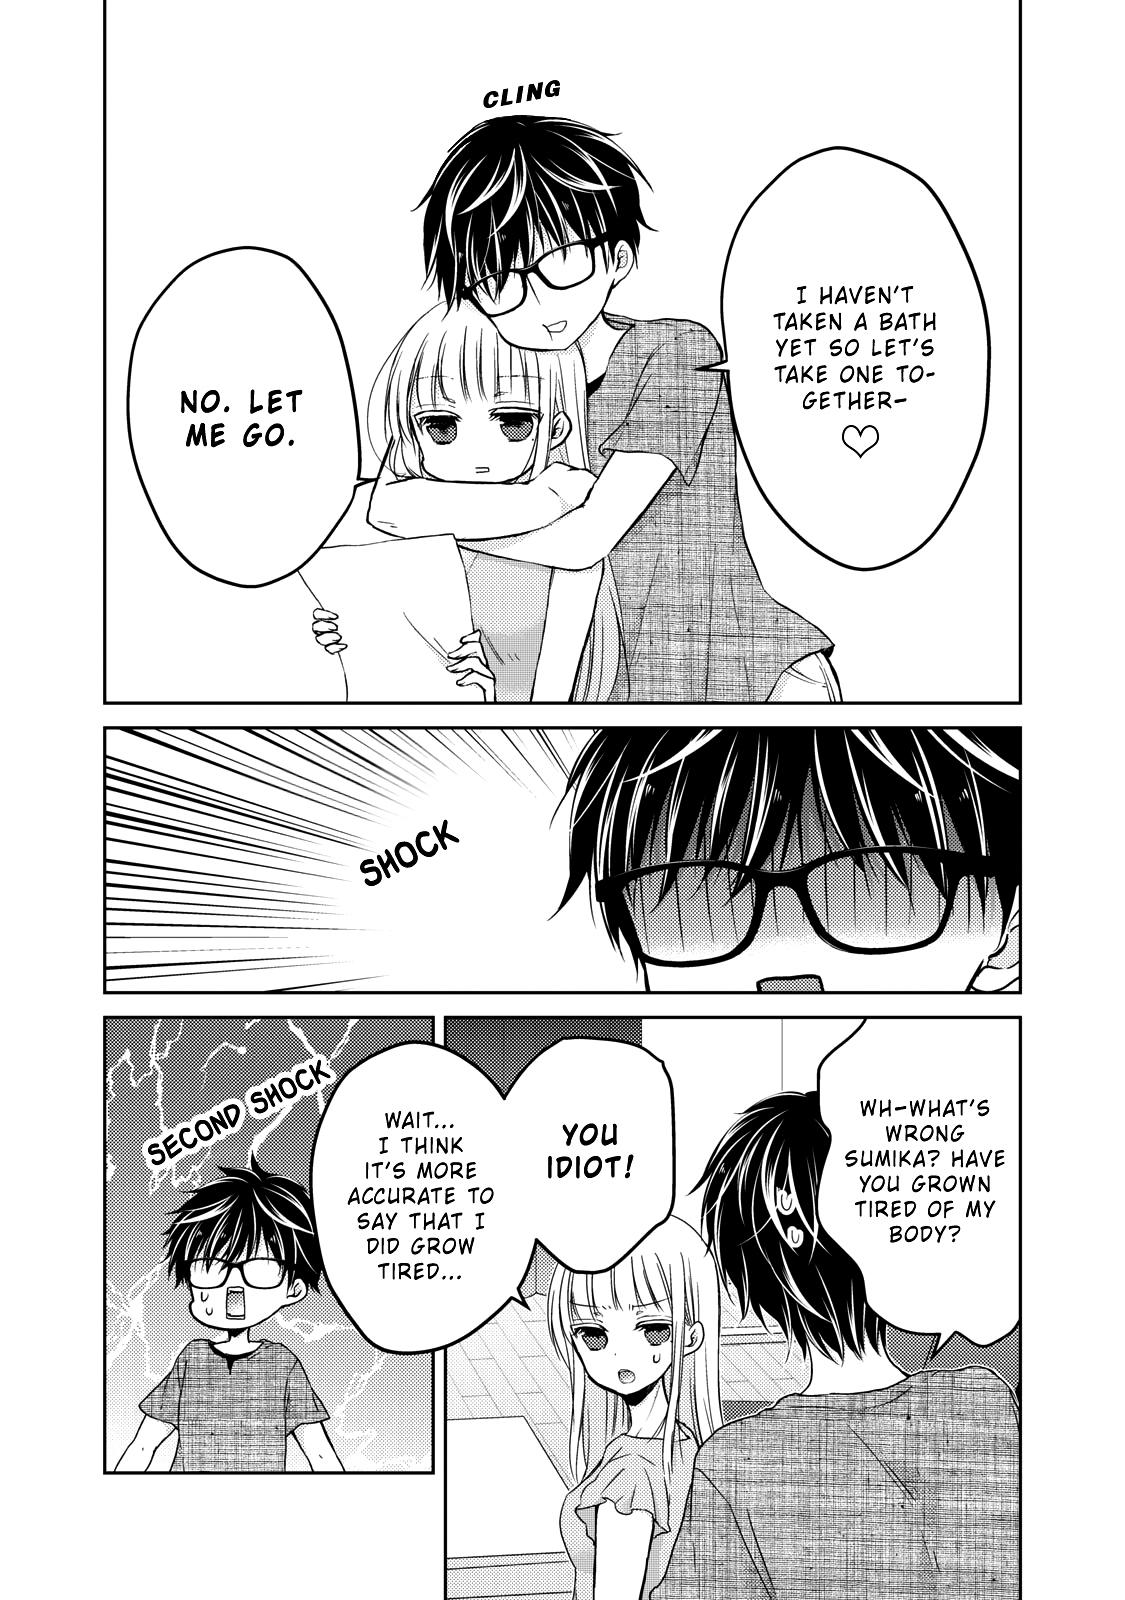 We May Be An Inexperienced Couple But... Vol. 4 Ch. 32 The Other Side Of The First Night